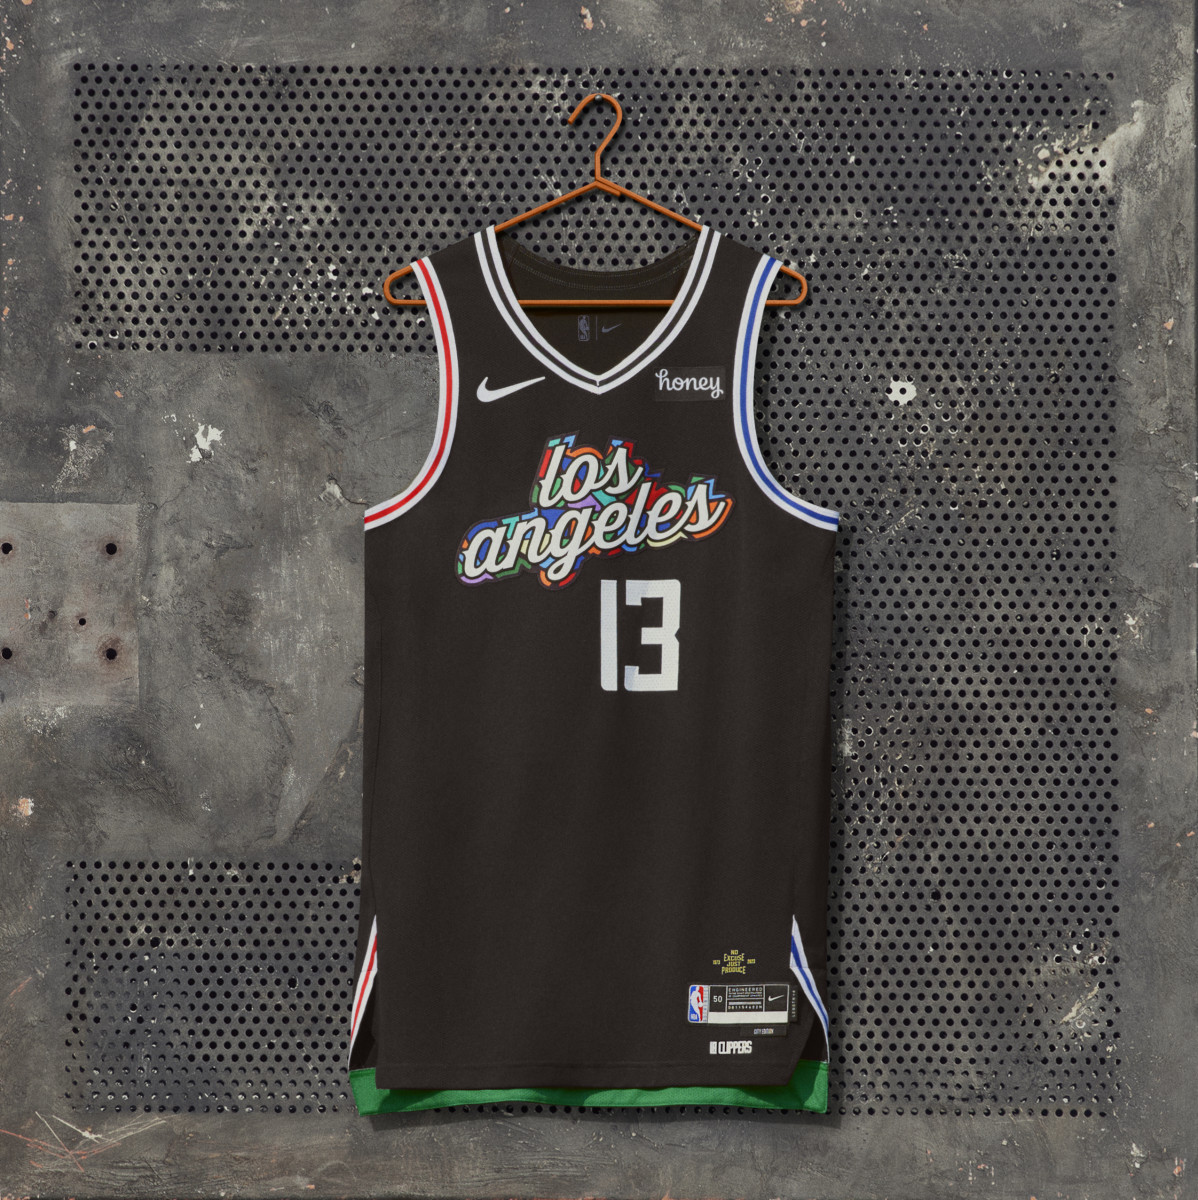 Clippers player edition jersey